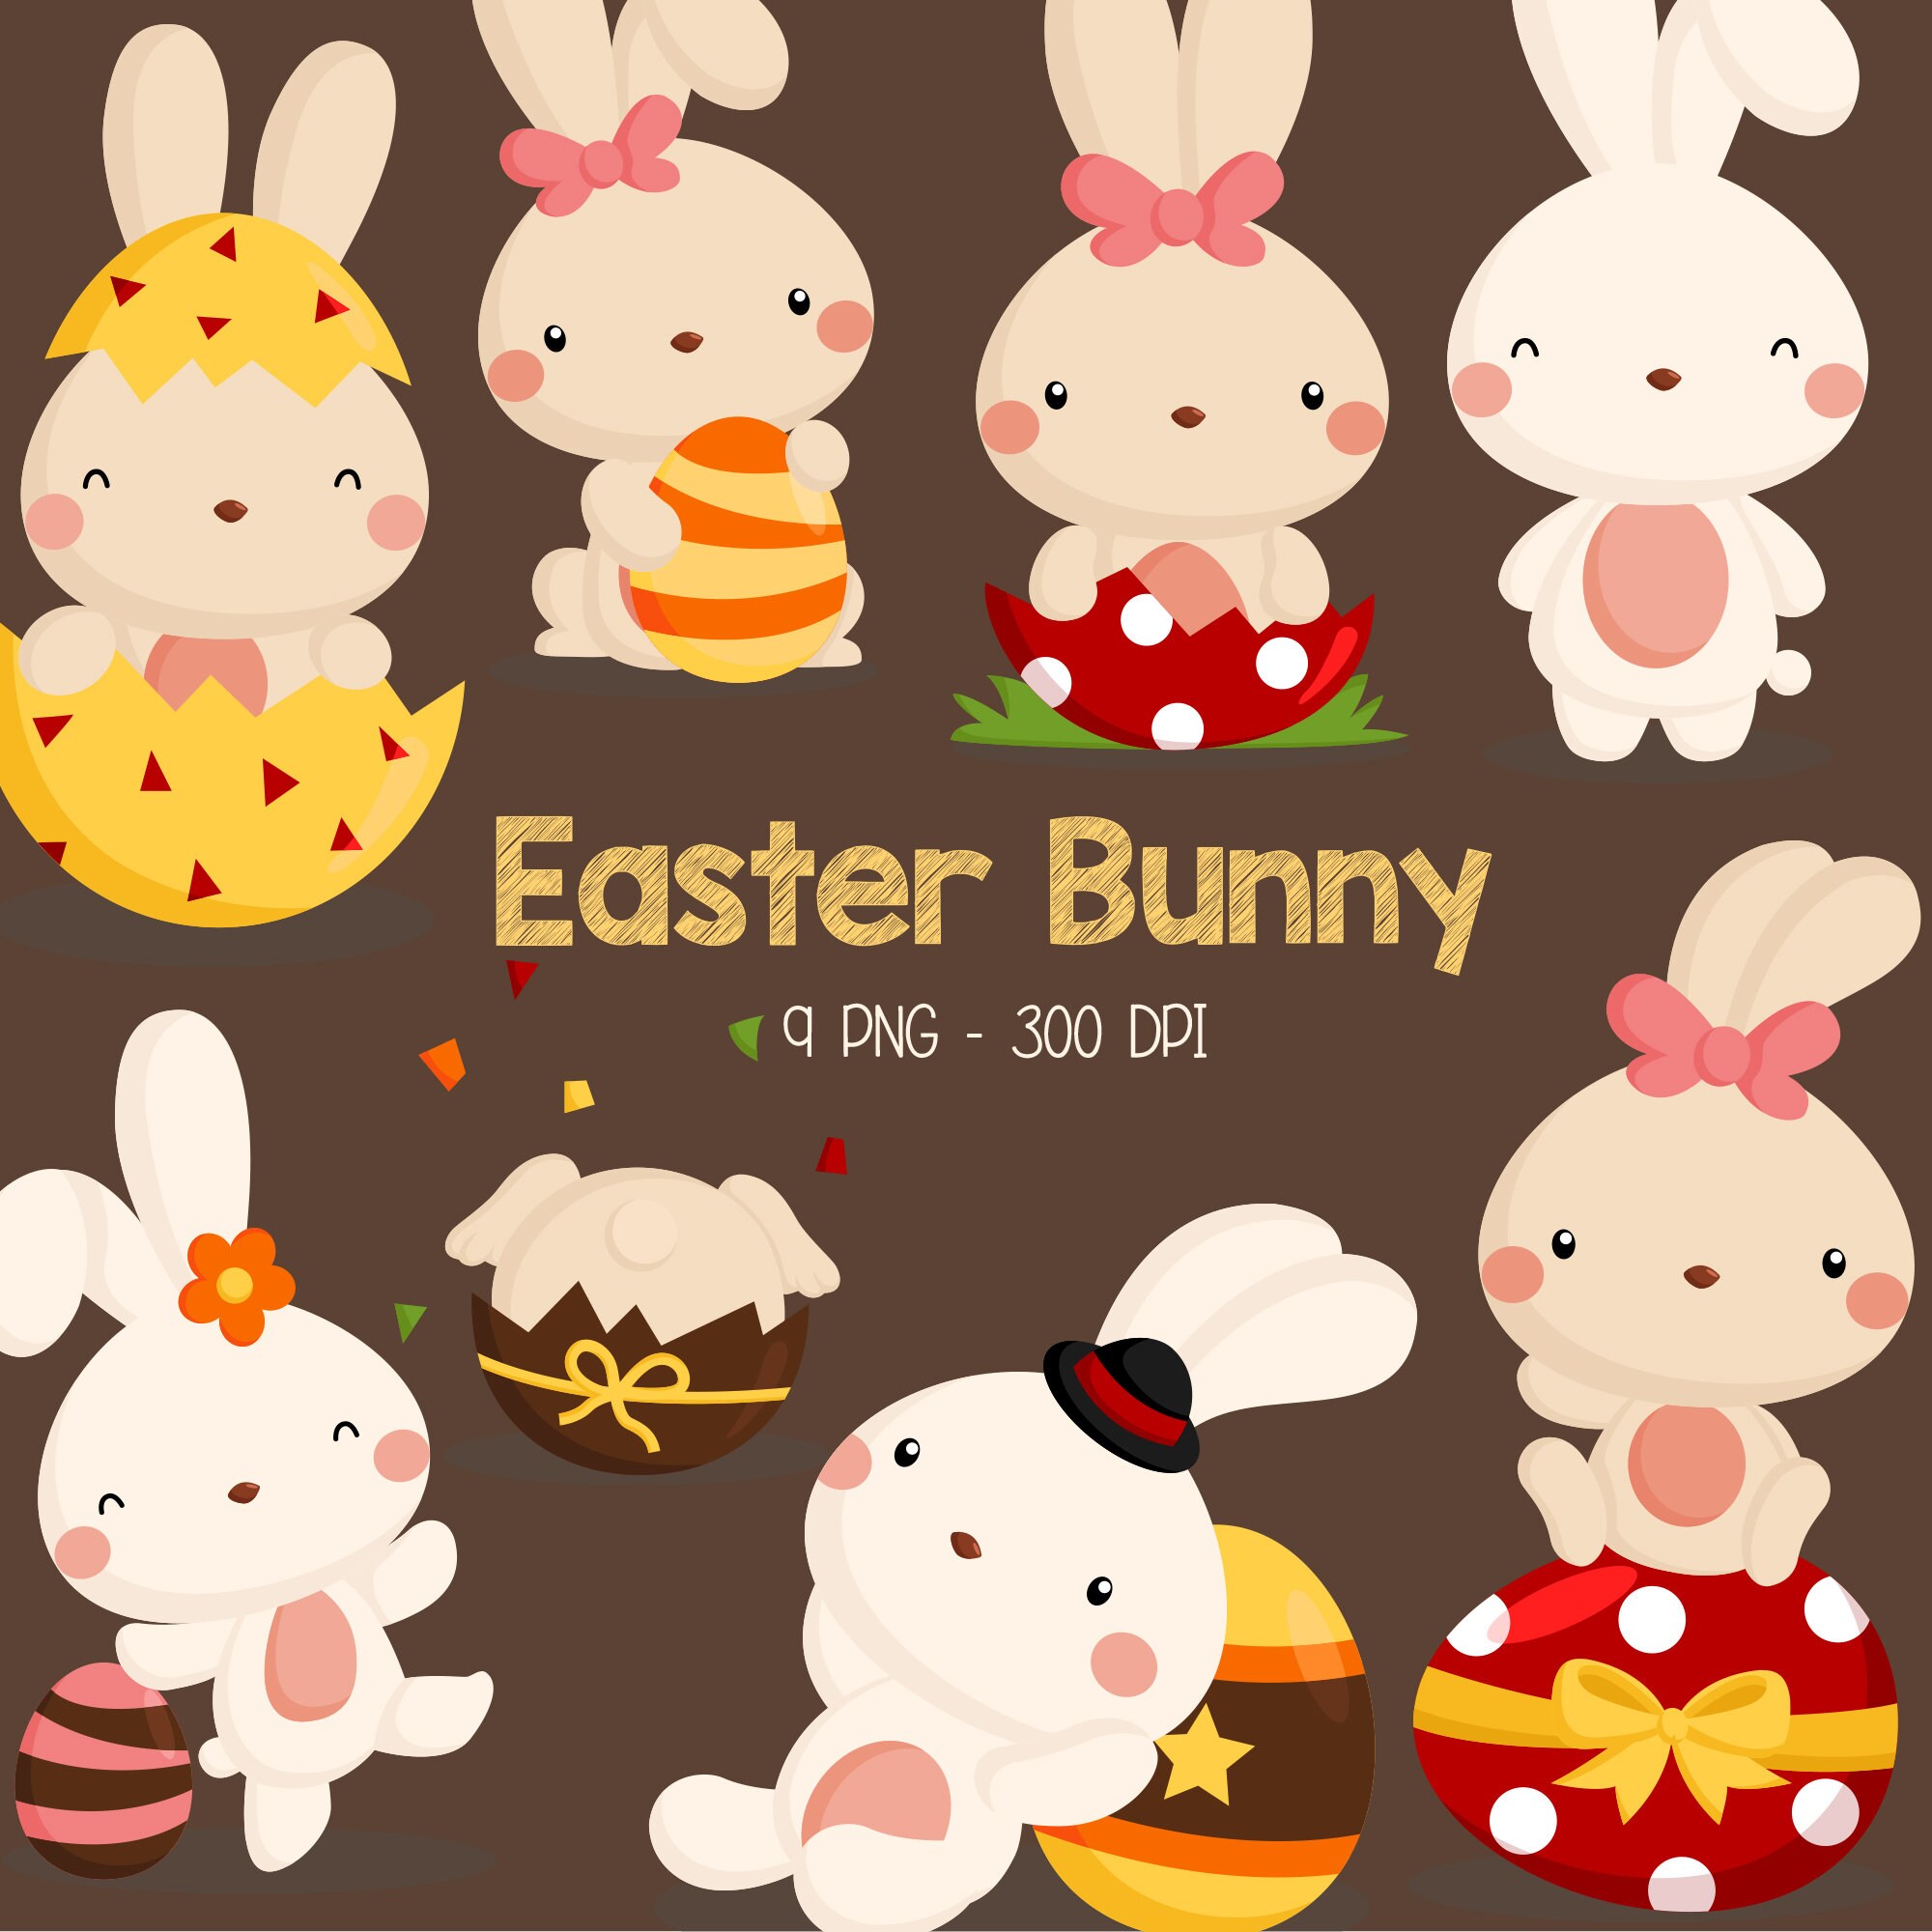 Download Easter Bunny Clipart Cute Animal Clip Art Easter Holiday Free Svg On Request